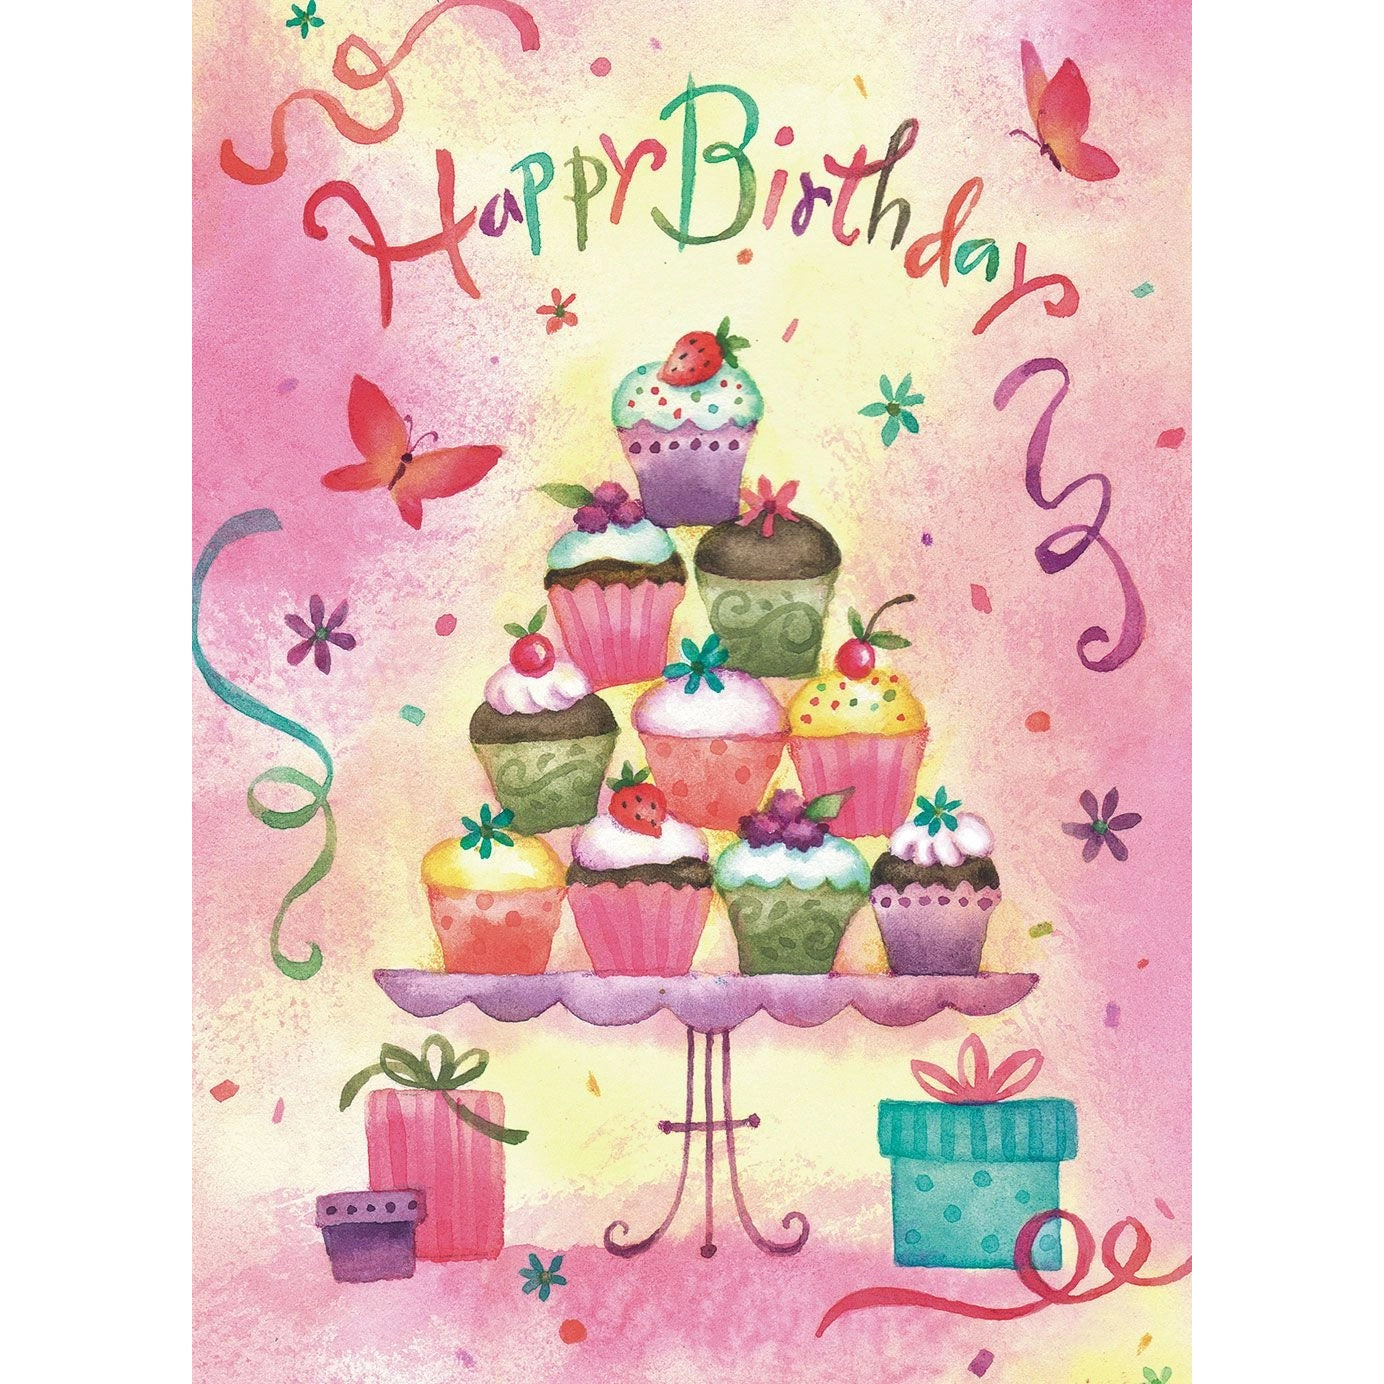 Pink birthday card with streamers, butterflies, flowers, cupcakes and presents in multicolors and "Happy Birthday" on the front